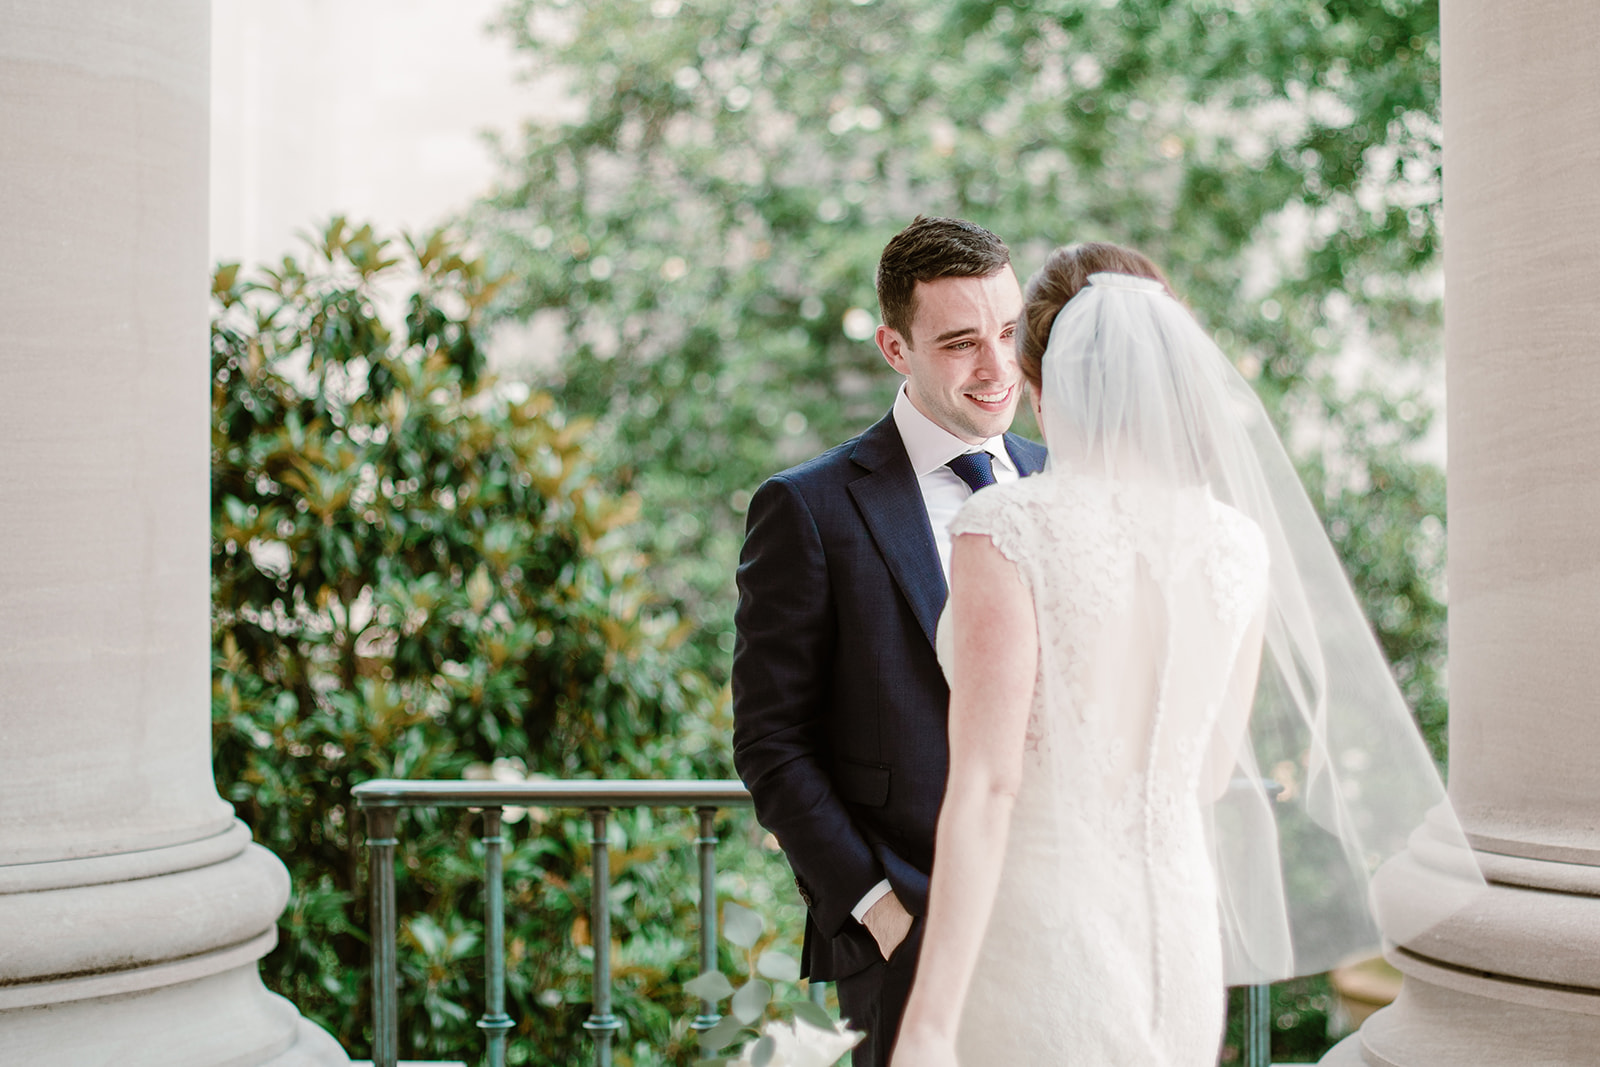  Bride and groom first look at the National Gallery of Art Museum, Washington D.C. Irish wedding with green and gold accents. Sarah Mattozzi Photography. 